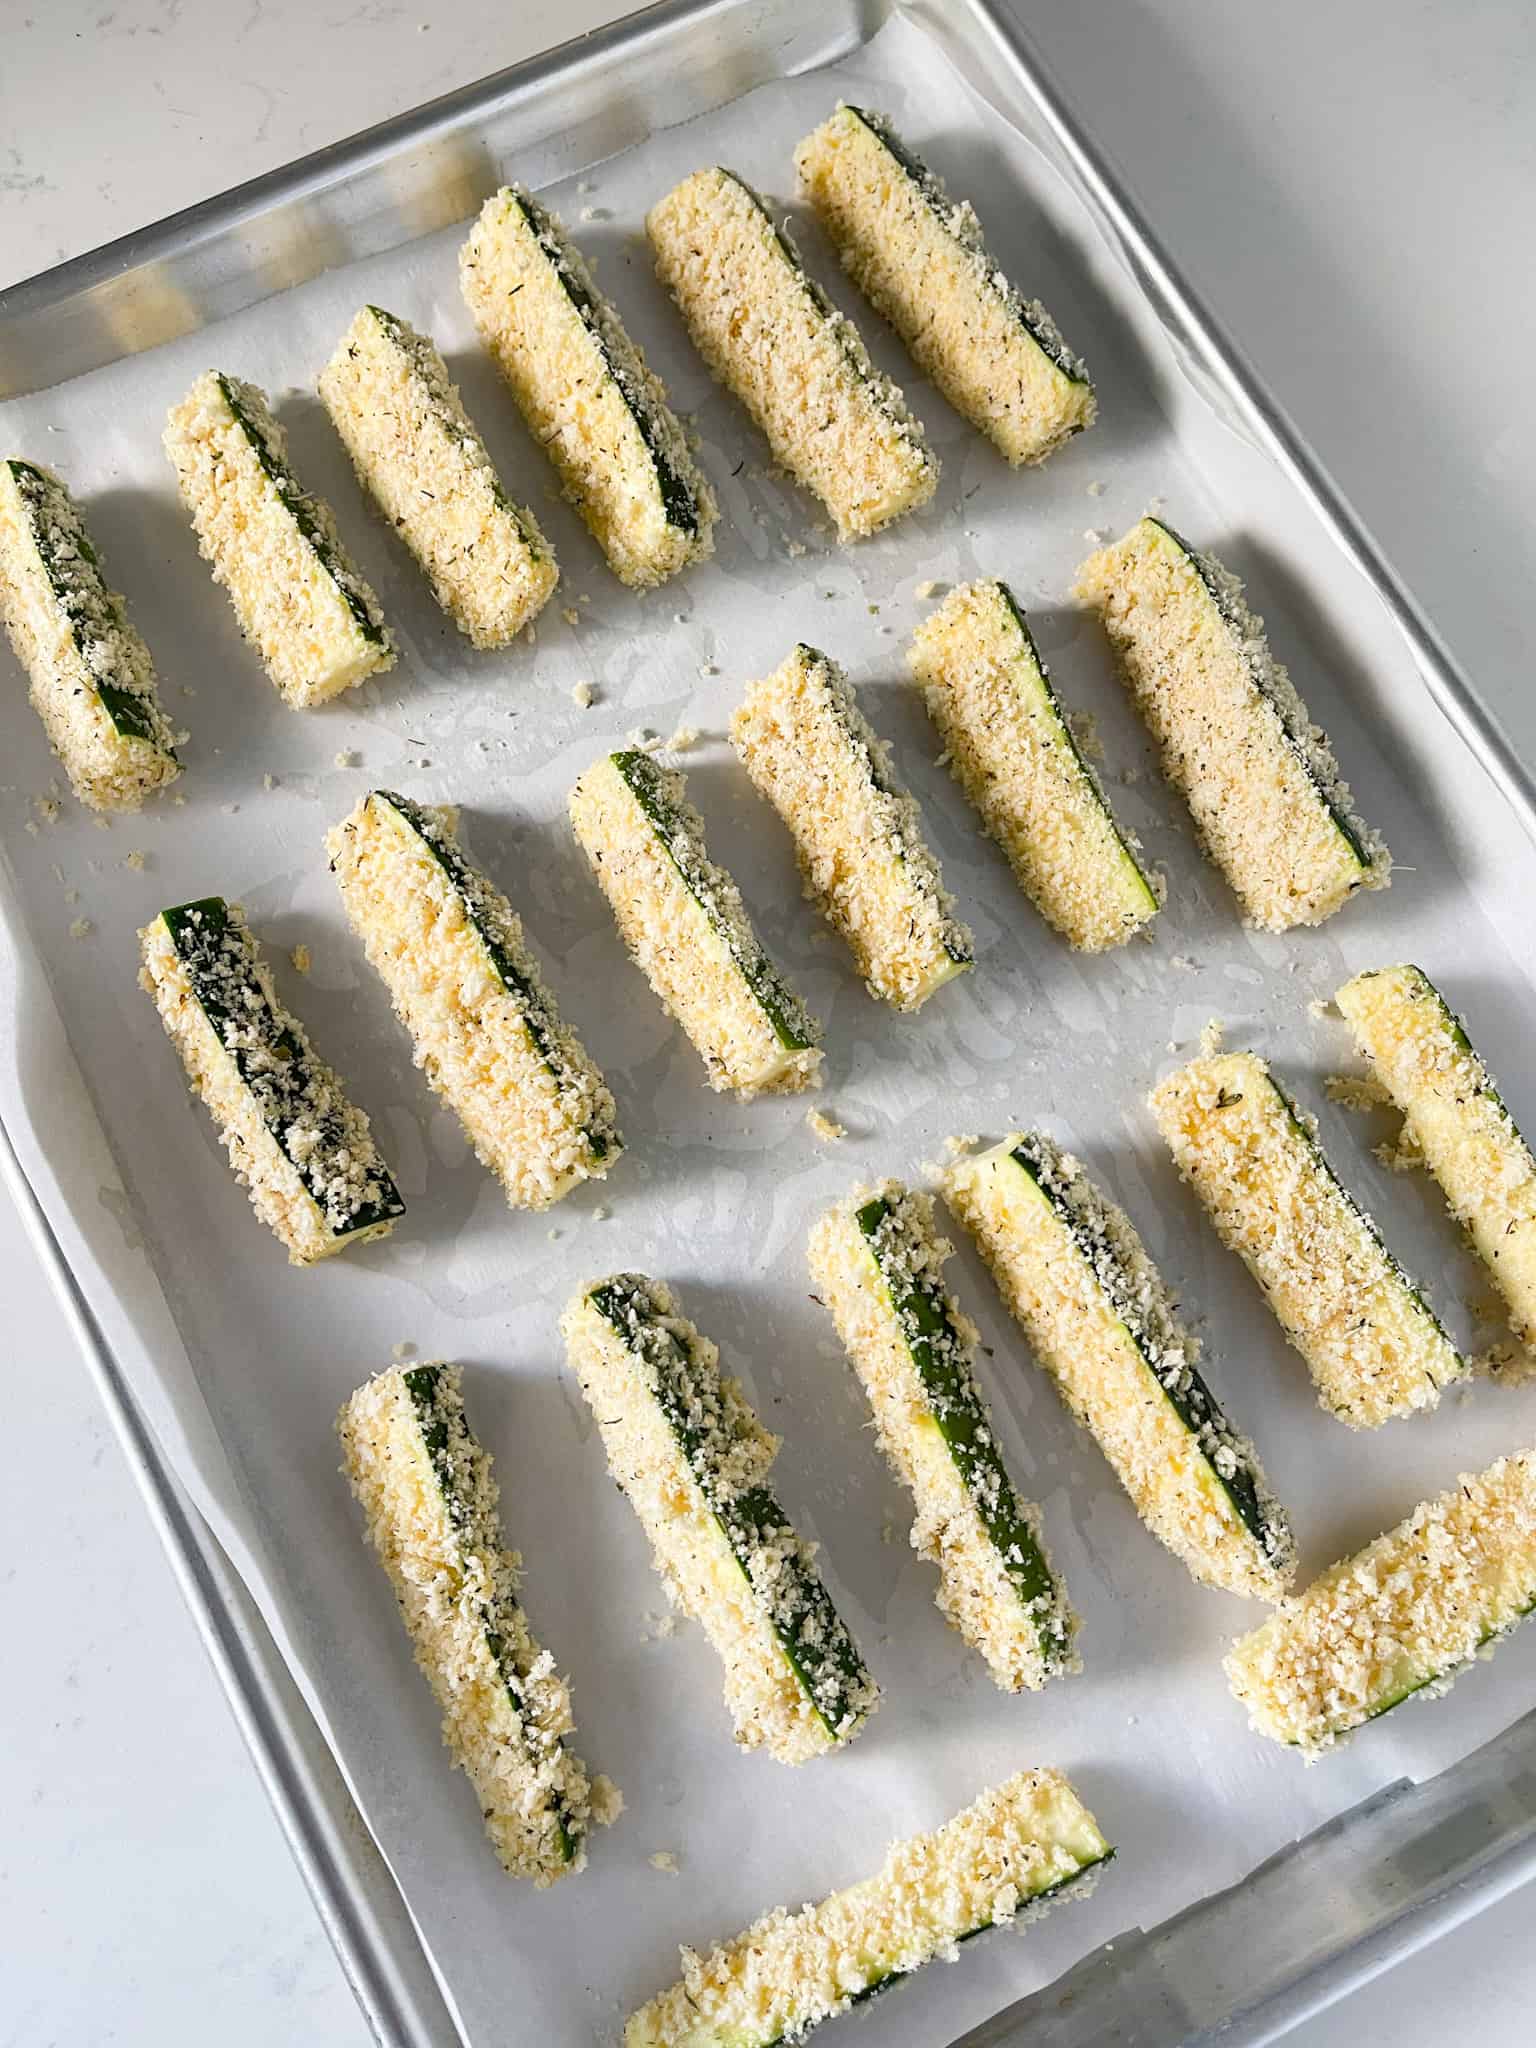 Zucchini fries lined on a baking sheet.